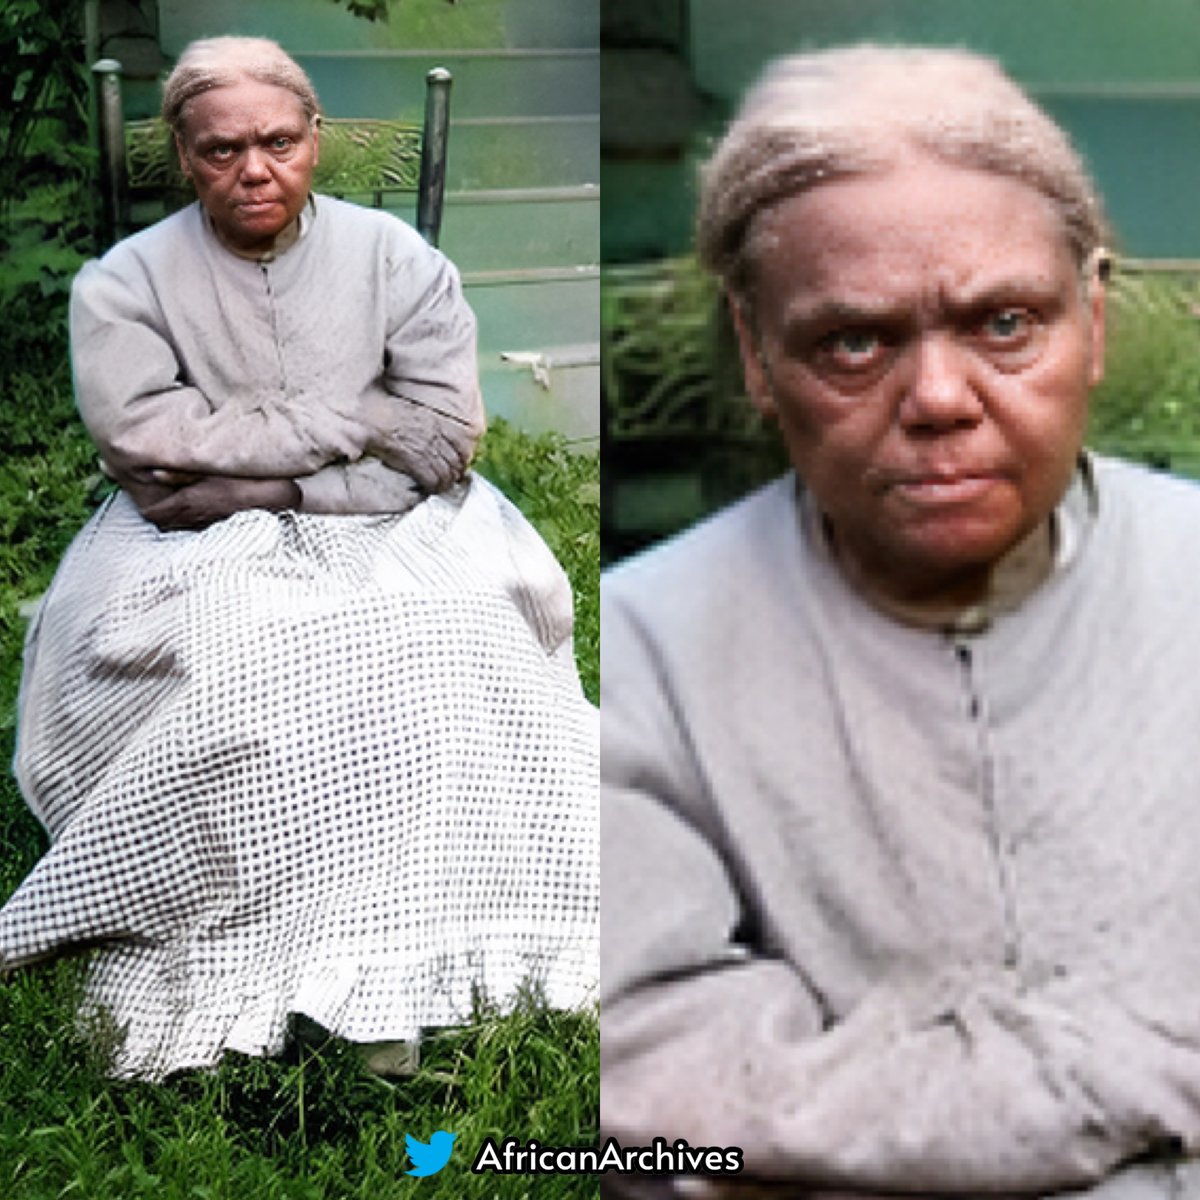 Aunt Polly Jackson, was an escaped enslaved woman who worked as an agent on the Underground Railroad helping others escape. She was known for fighting off slave catchers with a butcher knife and a kettle of boiling water. A THREAD!